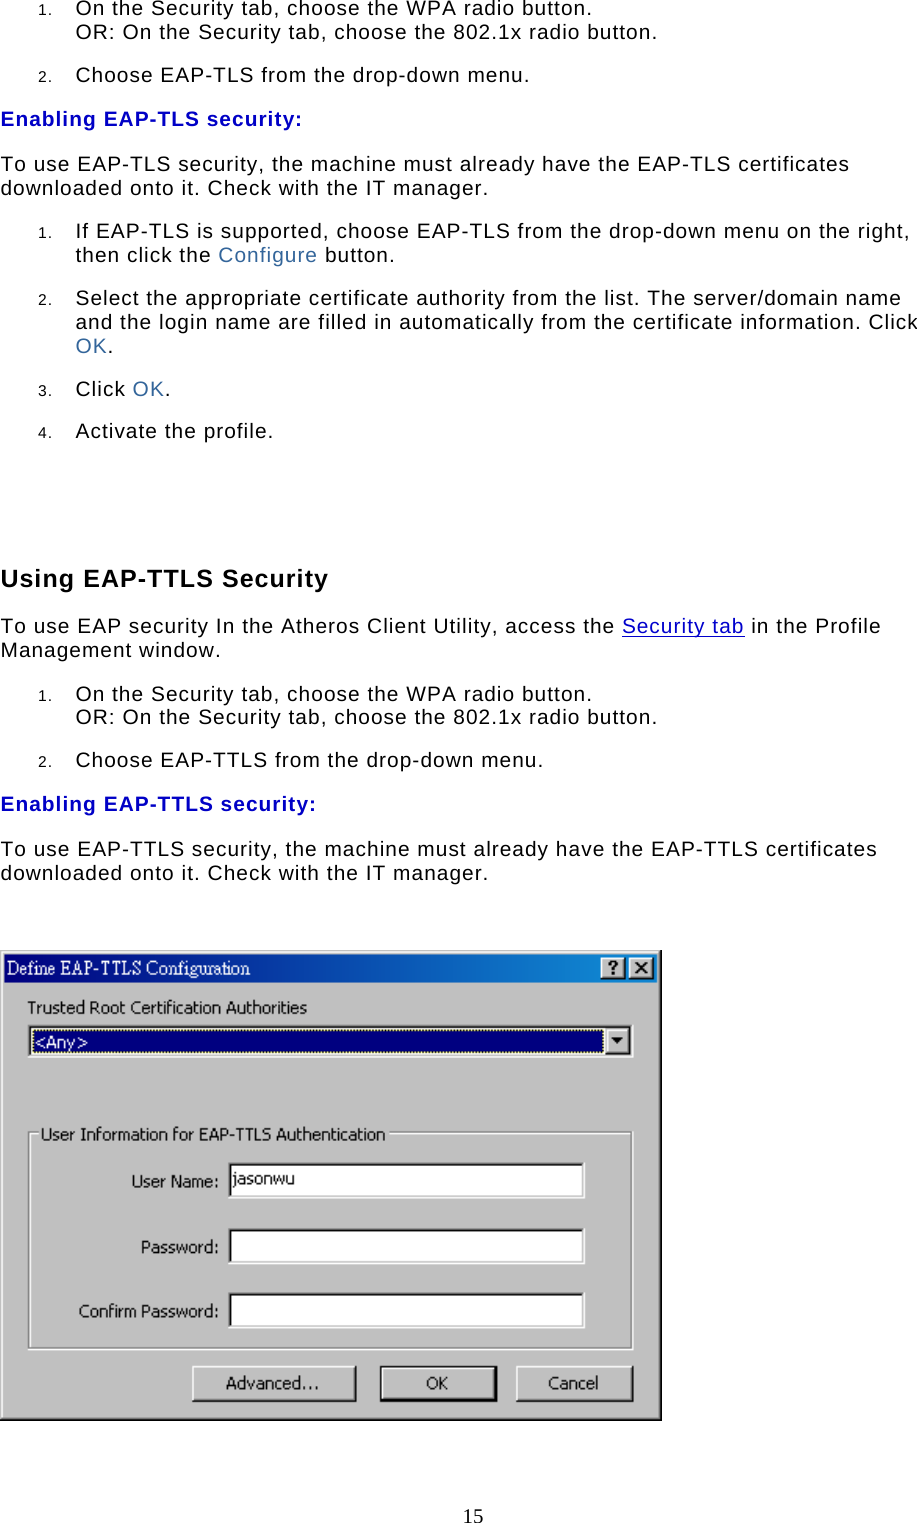  15 1.  On the Security tab, choose the WPA radio button.  OR: On the Security tab, choose the 802.1x radio button.   2.  Choose EAP-TLS from the drop-down menu.  Enabling EAP-TLS security: To use EAP-TLS security, the machine must already have the EAP-TLS certificates downloaded onto it. Check with the IT manager. 1.  If EAP-TLS is supported, choose EAP-TLS from the drop-down menu on the right, then click the Configure button.  2.  Select the appropriate certificate authority from the list. The server/domain name and the login name are filled in automatically from the certificate information. Click OK.  3.  Click OK.  4.  Activate the profile.      Using EAP-TTLS Security To use EAP security In the Atheros Client Utility, access the Security tab in the Profile Management window.  1.  On the Security tab, choose the WPA radio button.  OR: On the Security tab, choose the 802.1x radio button.   2.  Choose EAP-TTLS from the drop-down menu.  Enabling EAP-TTLS security: To use EAP-TTLS security, the machine must already have the EAP-TTLS certificates downloaded onto it. Check with the IT manager.    